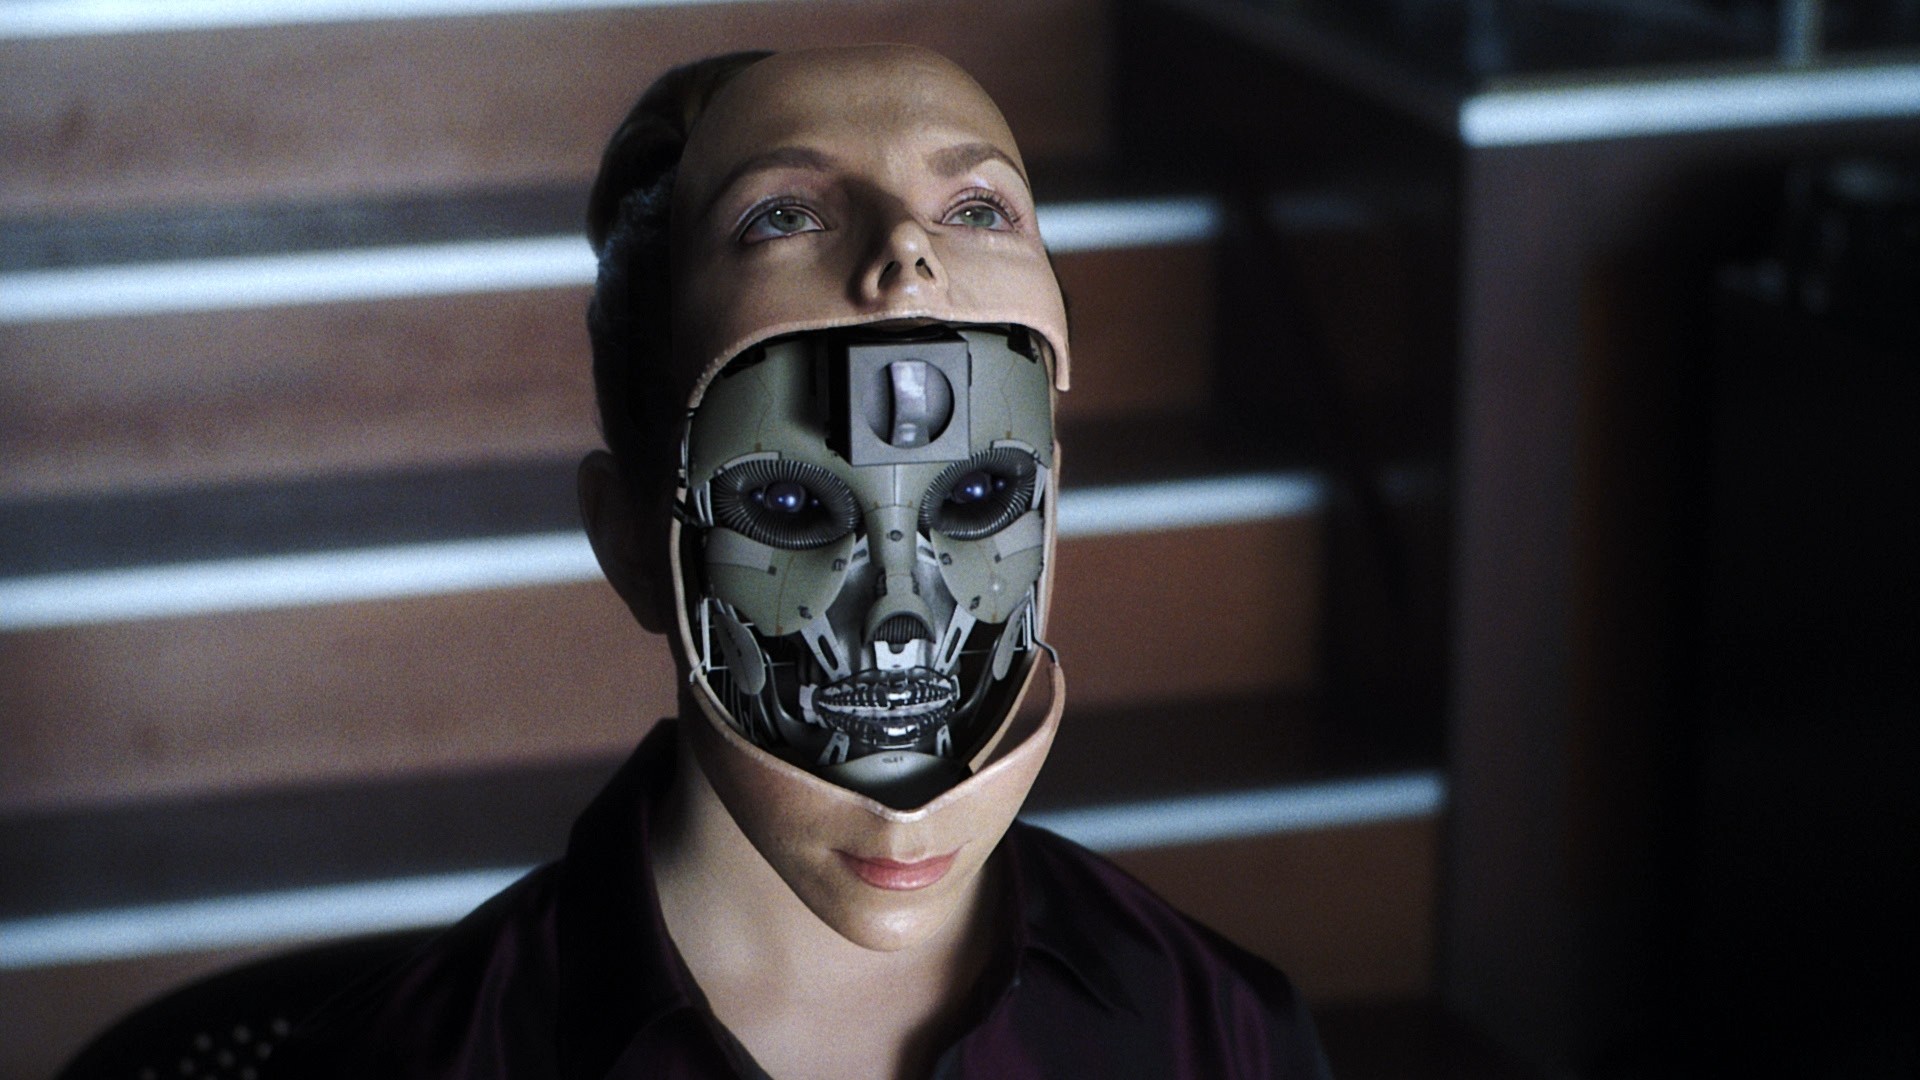 General 1920x1080 androids robot machine mask horror science fiction